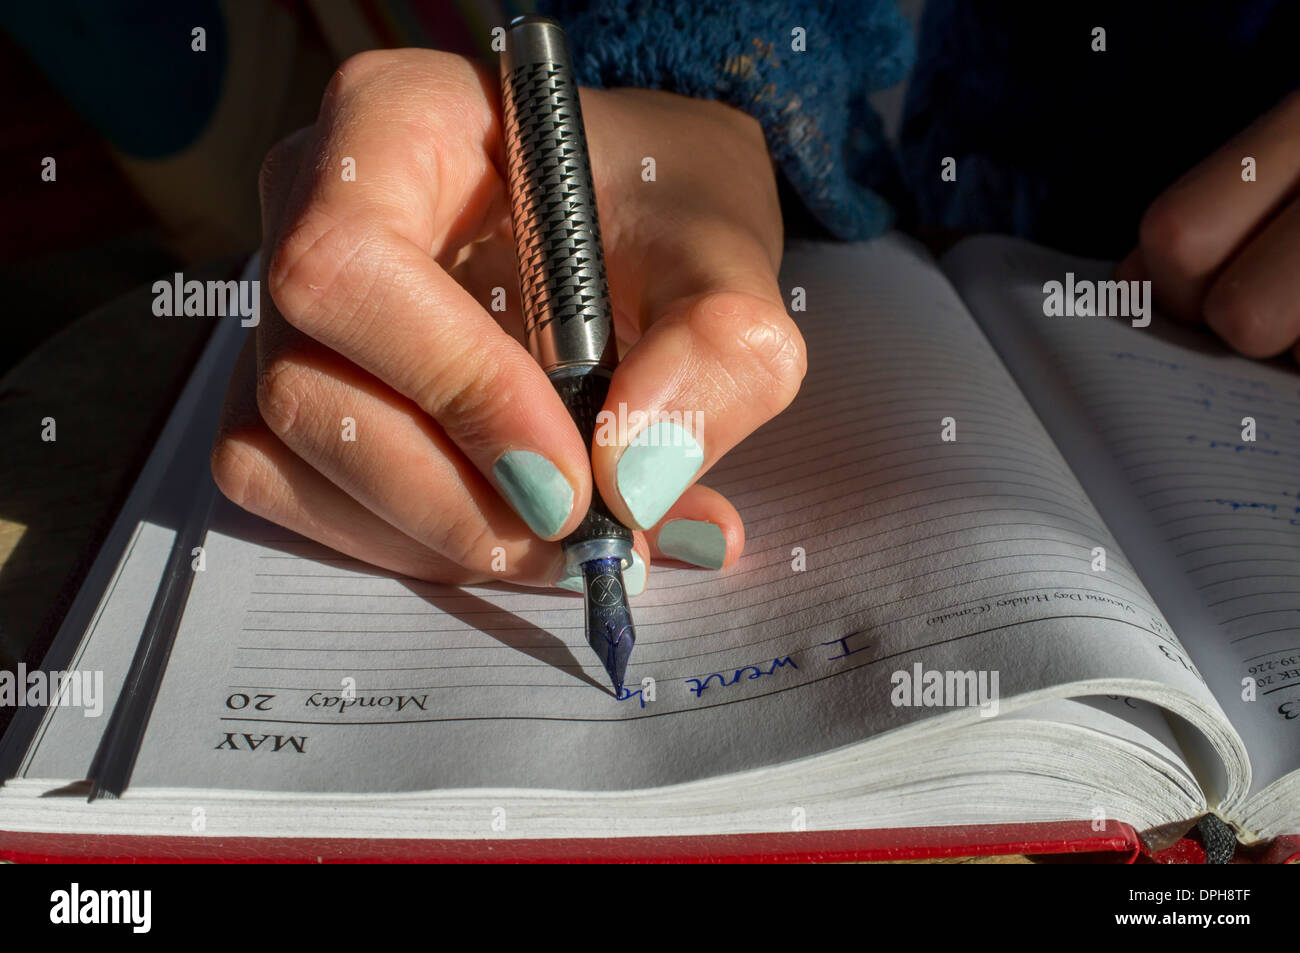 Writing with ink pen Stock Photo